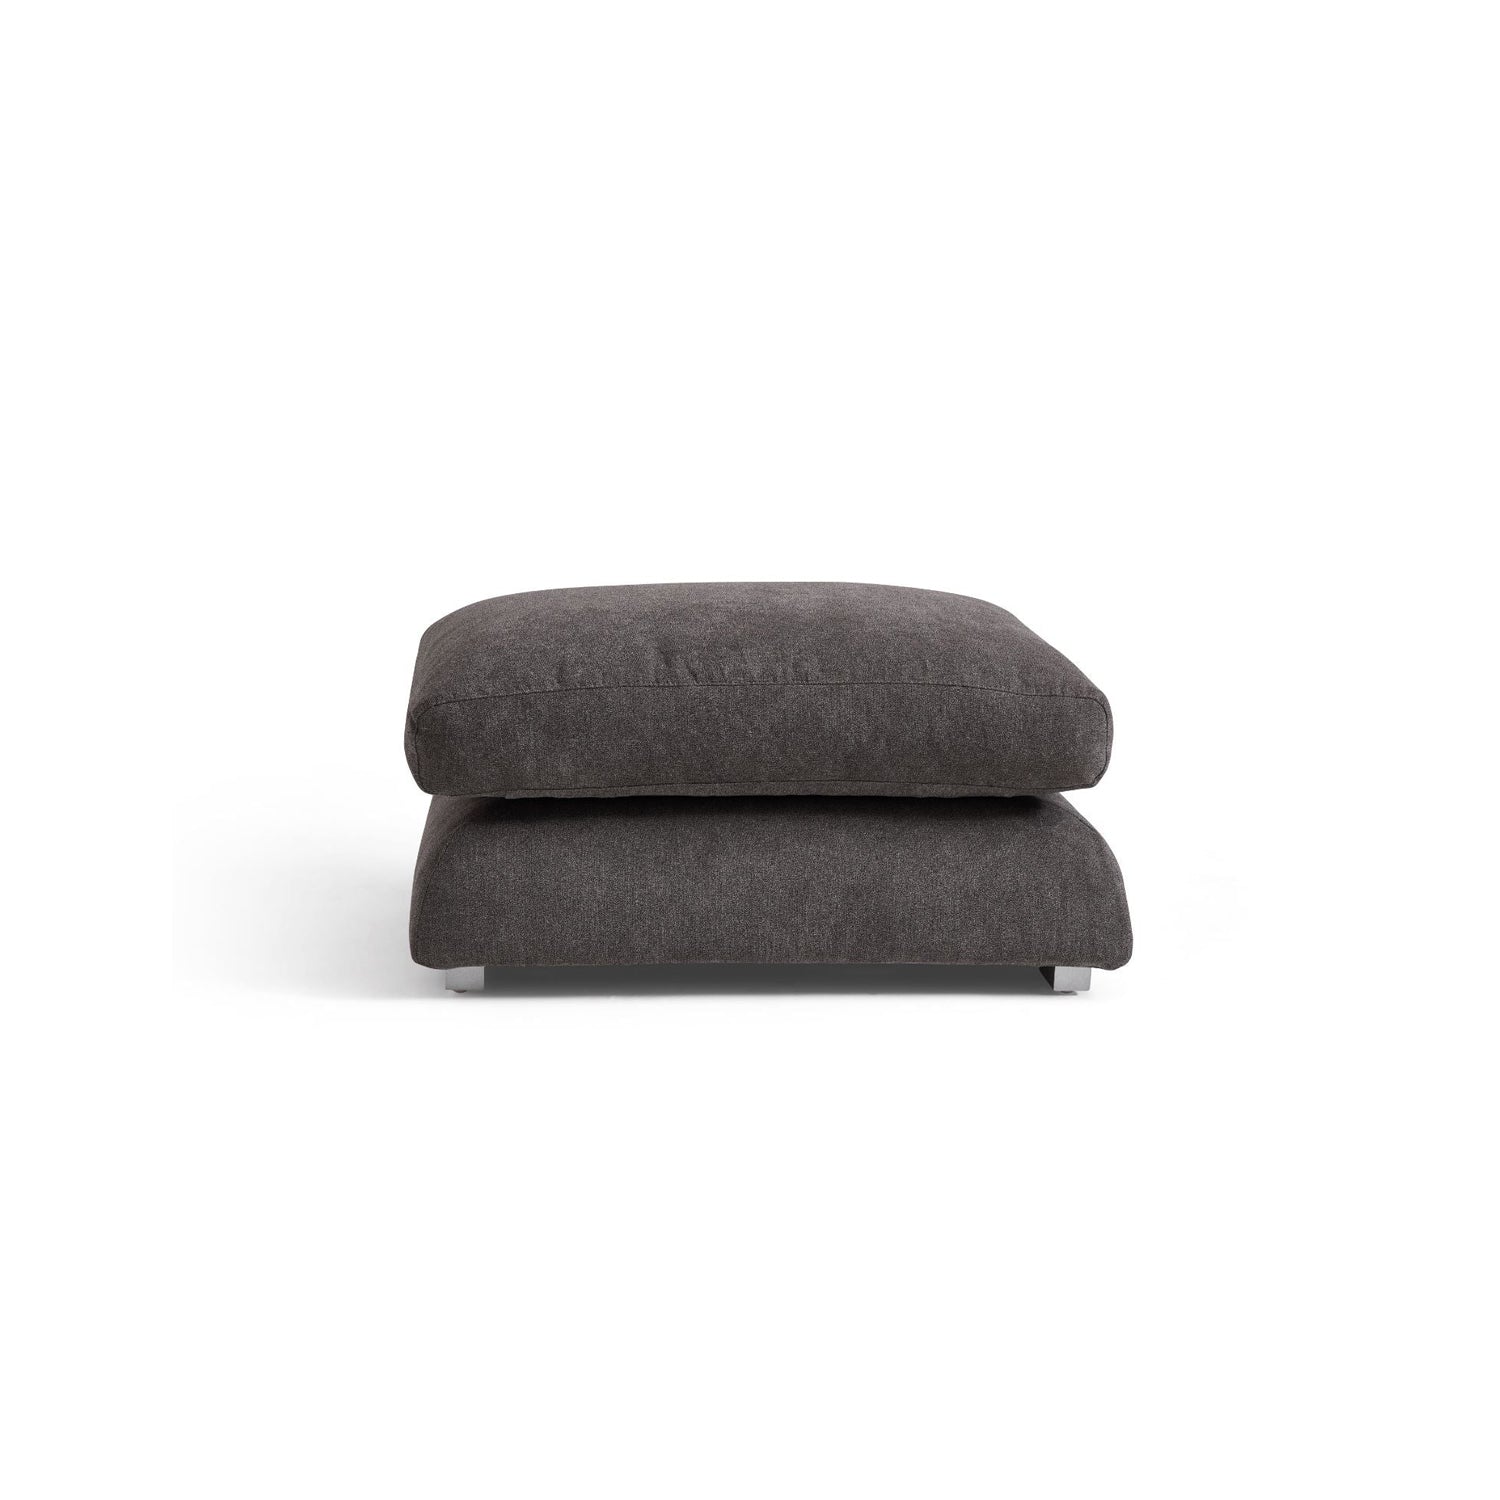 Feathers Ottoman - Valyou 